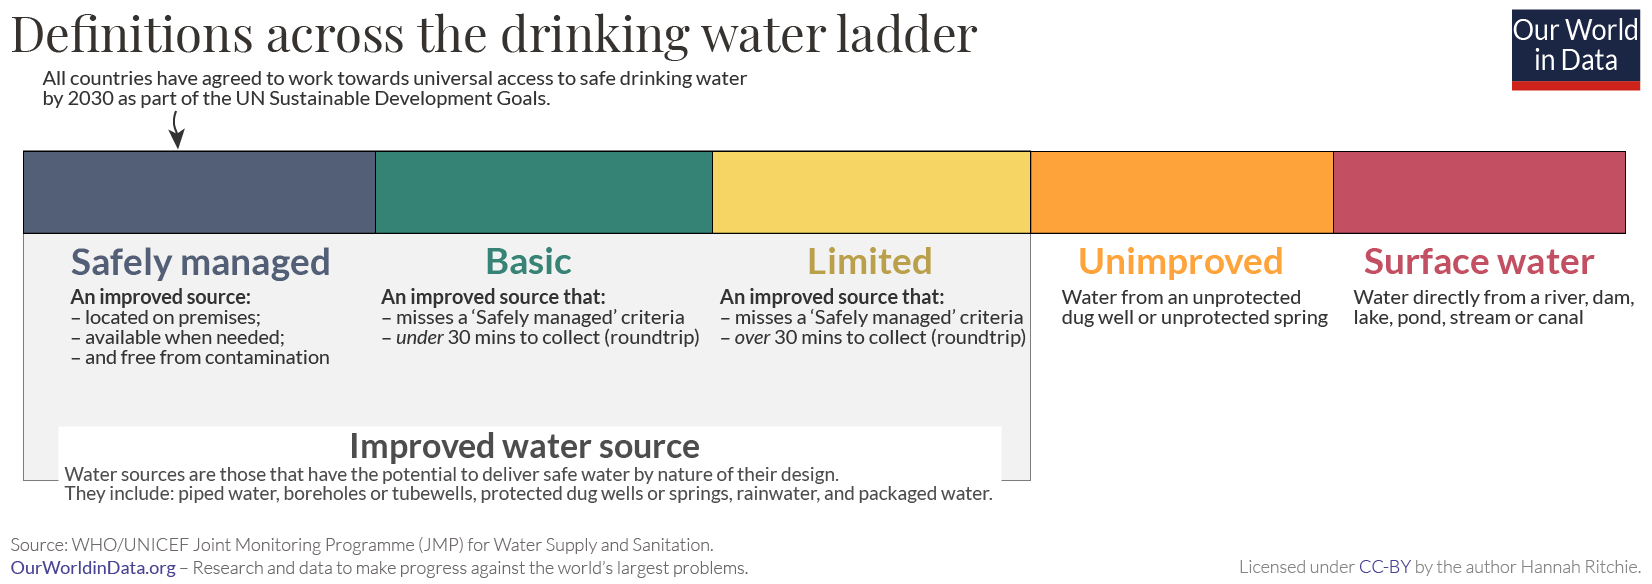 Definition across the drinking water ladder